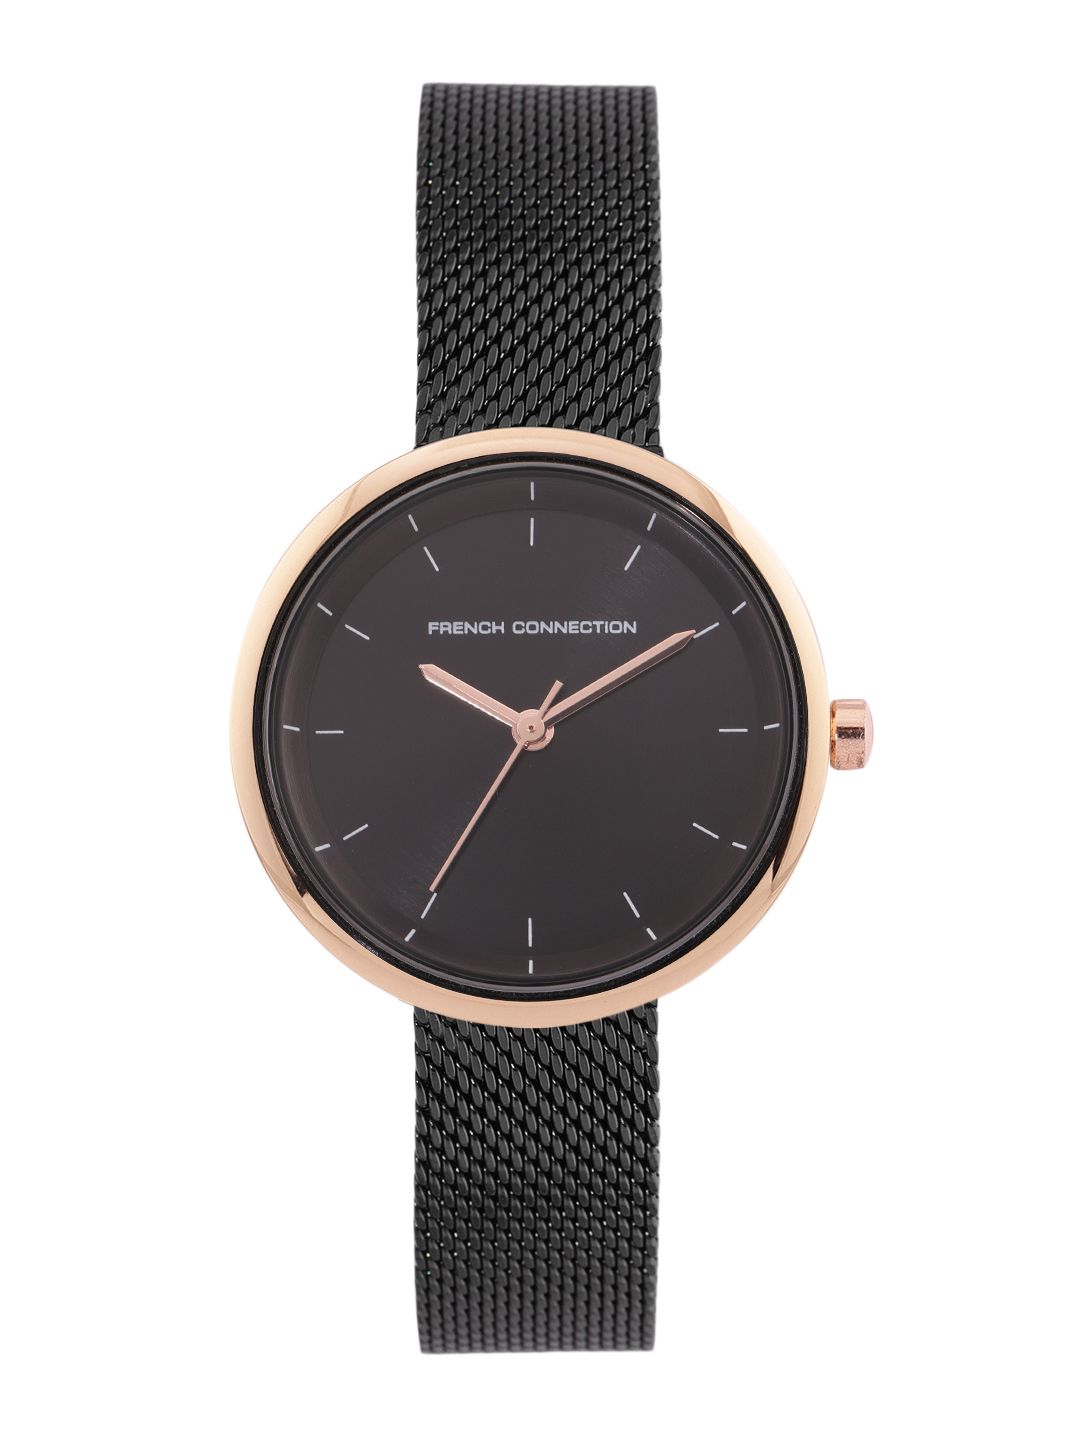 French Connection Women Black Analogue Watch FCN00036F Price in India